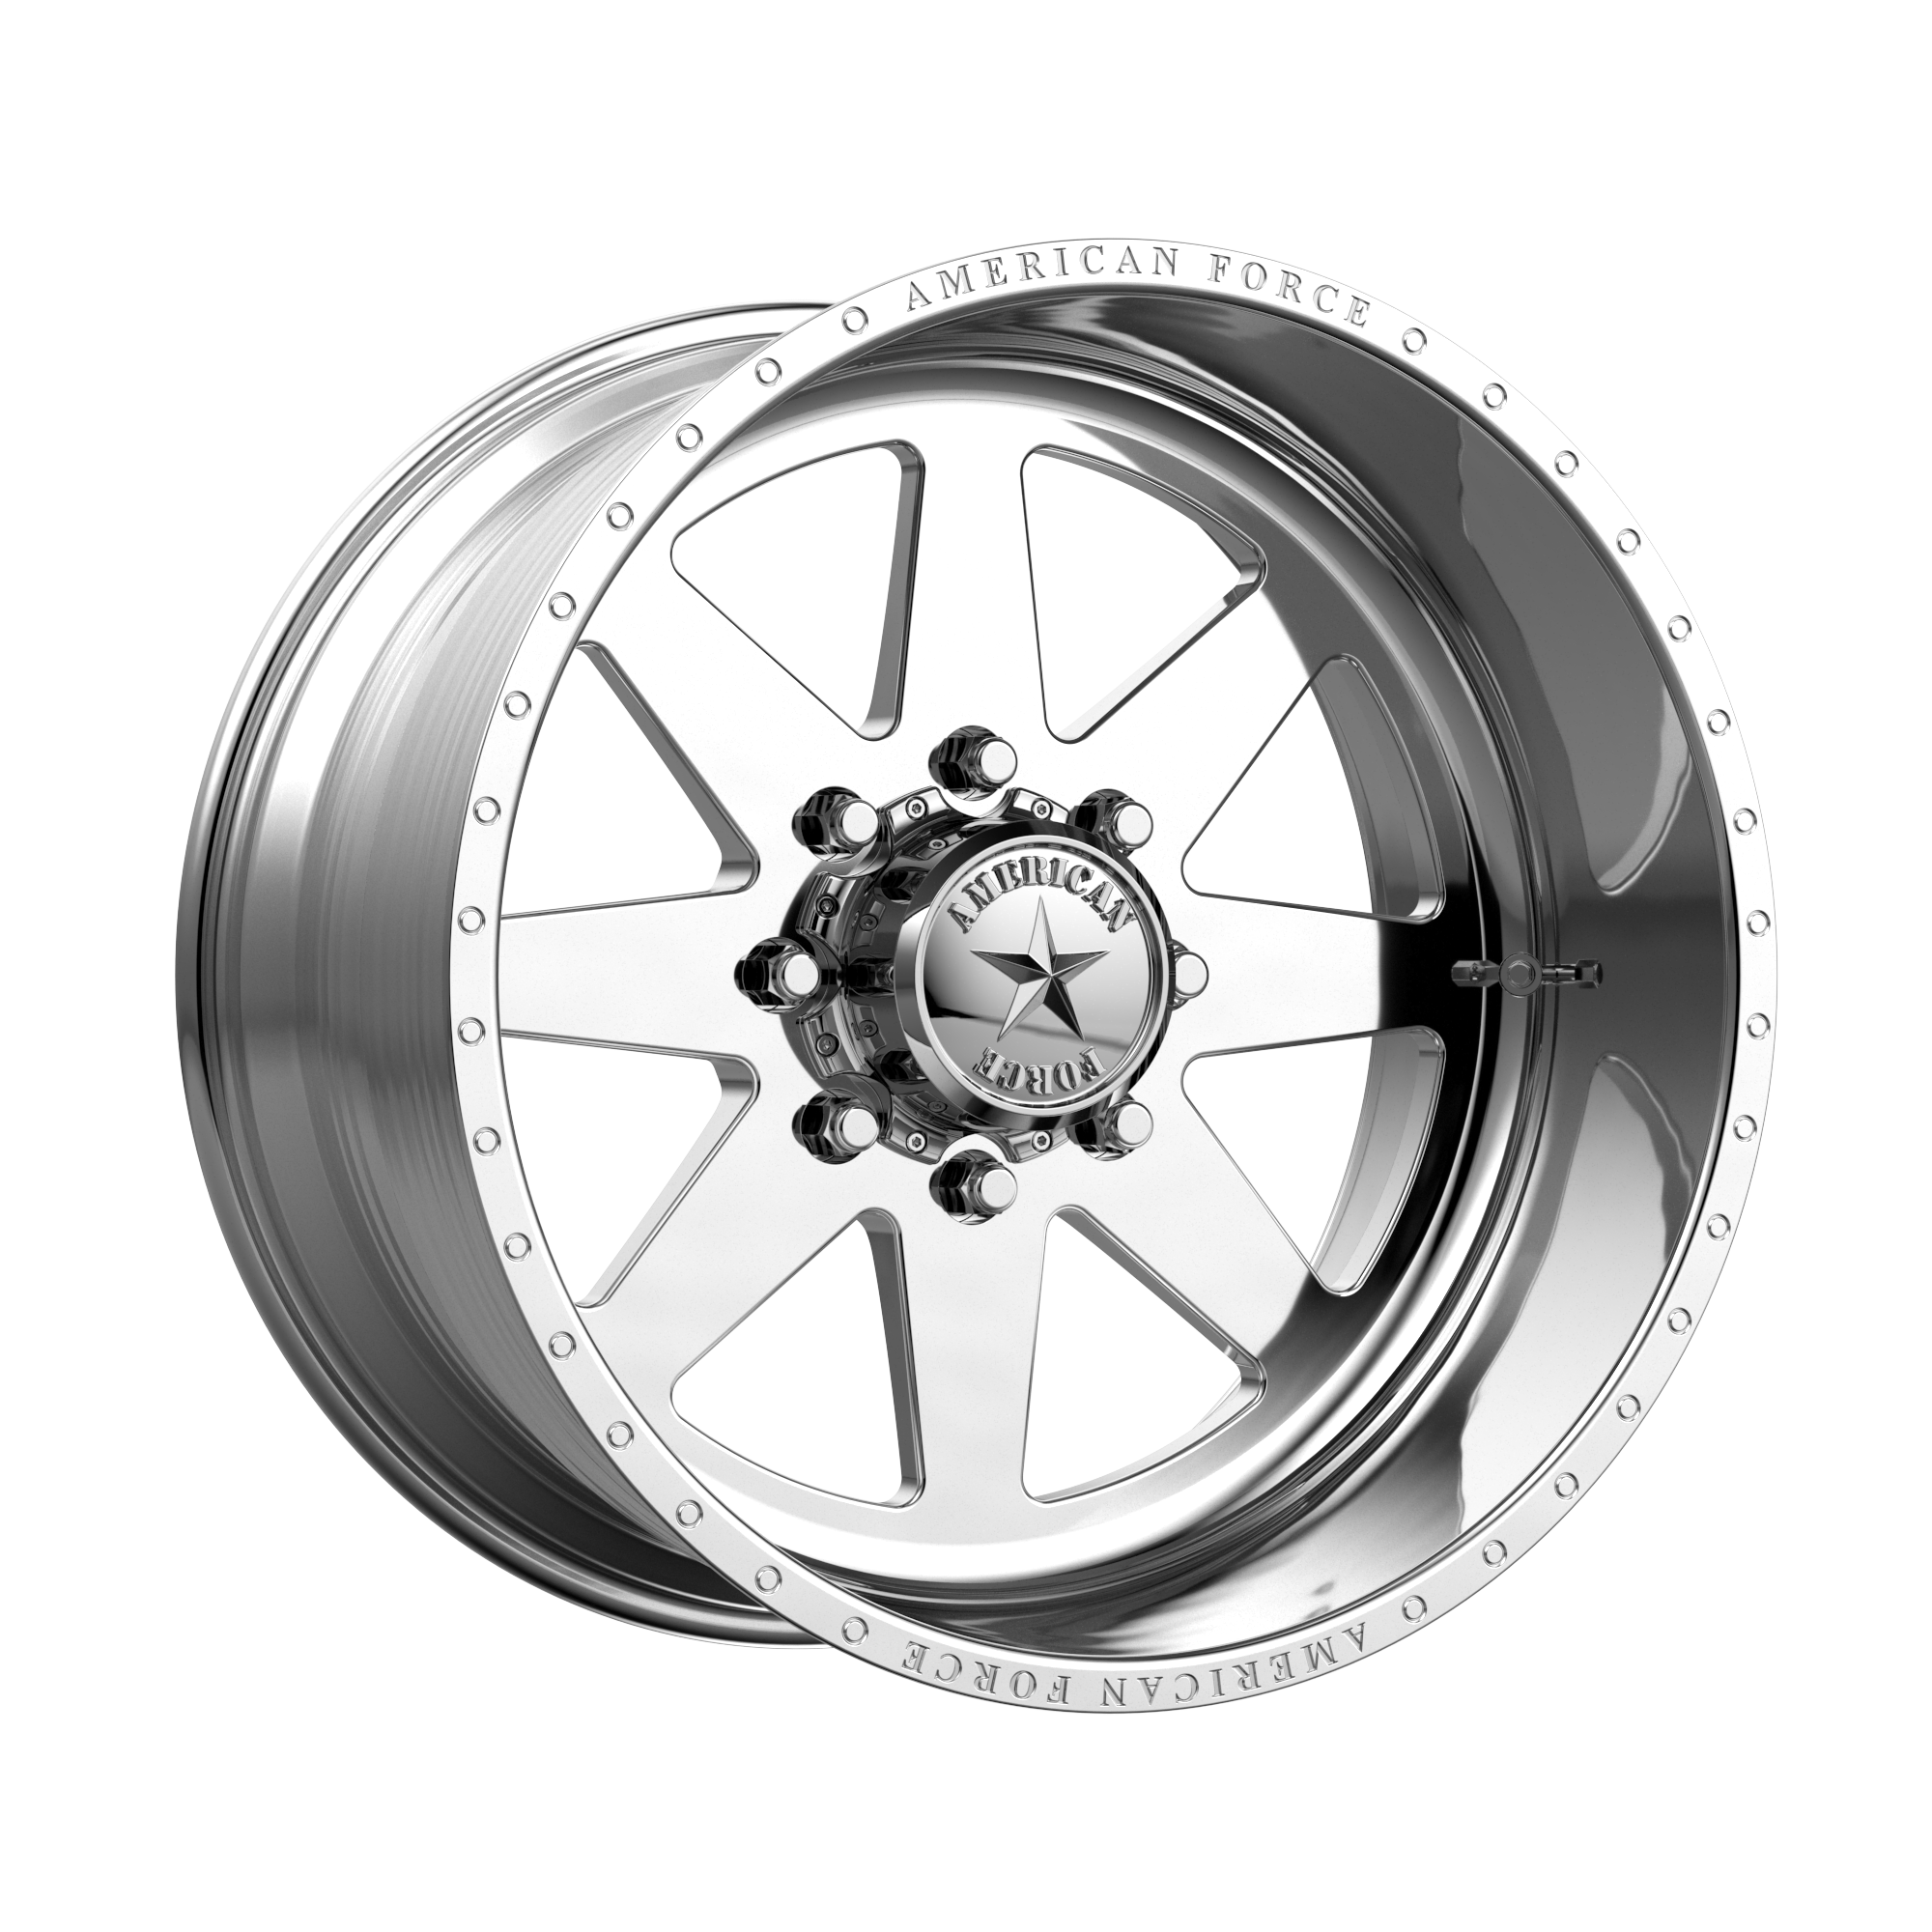 INDEPENDENCE SS 20x10 8x180.00 POLISHED (-25 mm) - Tires and Engine Performance